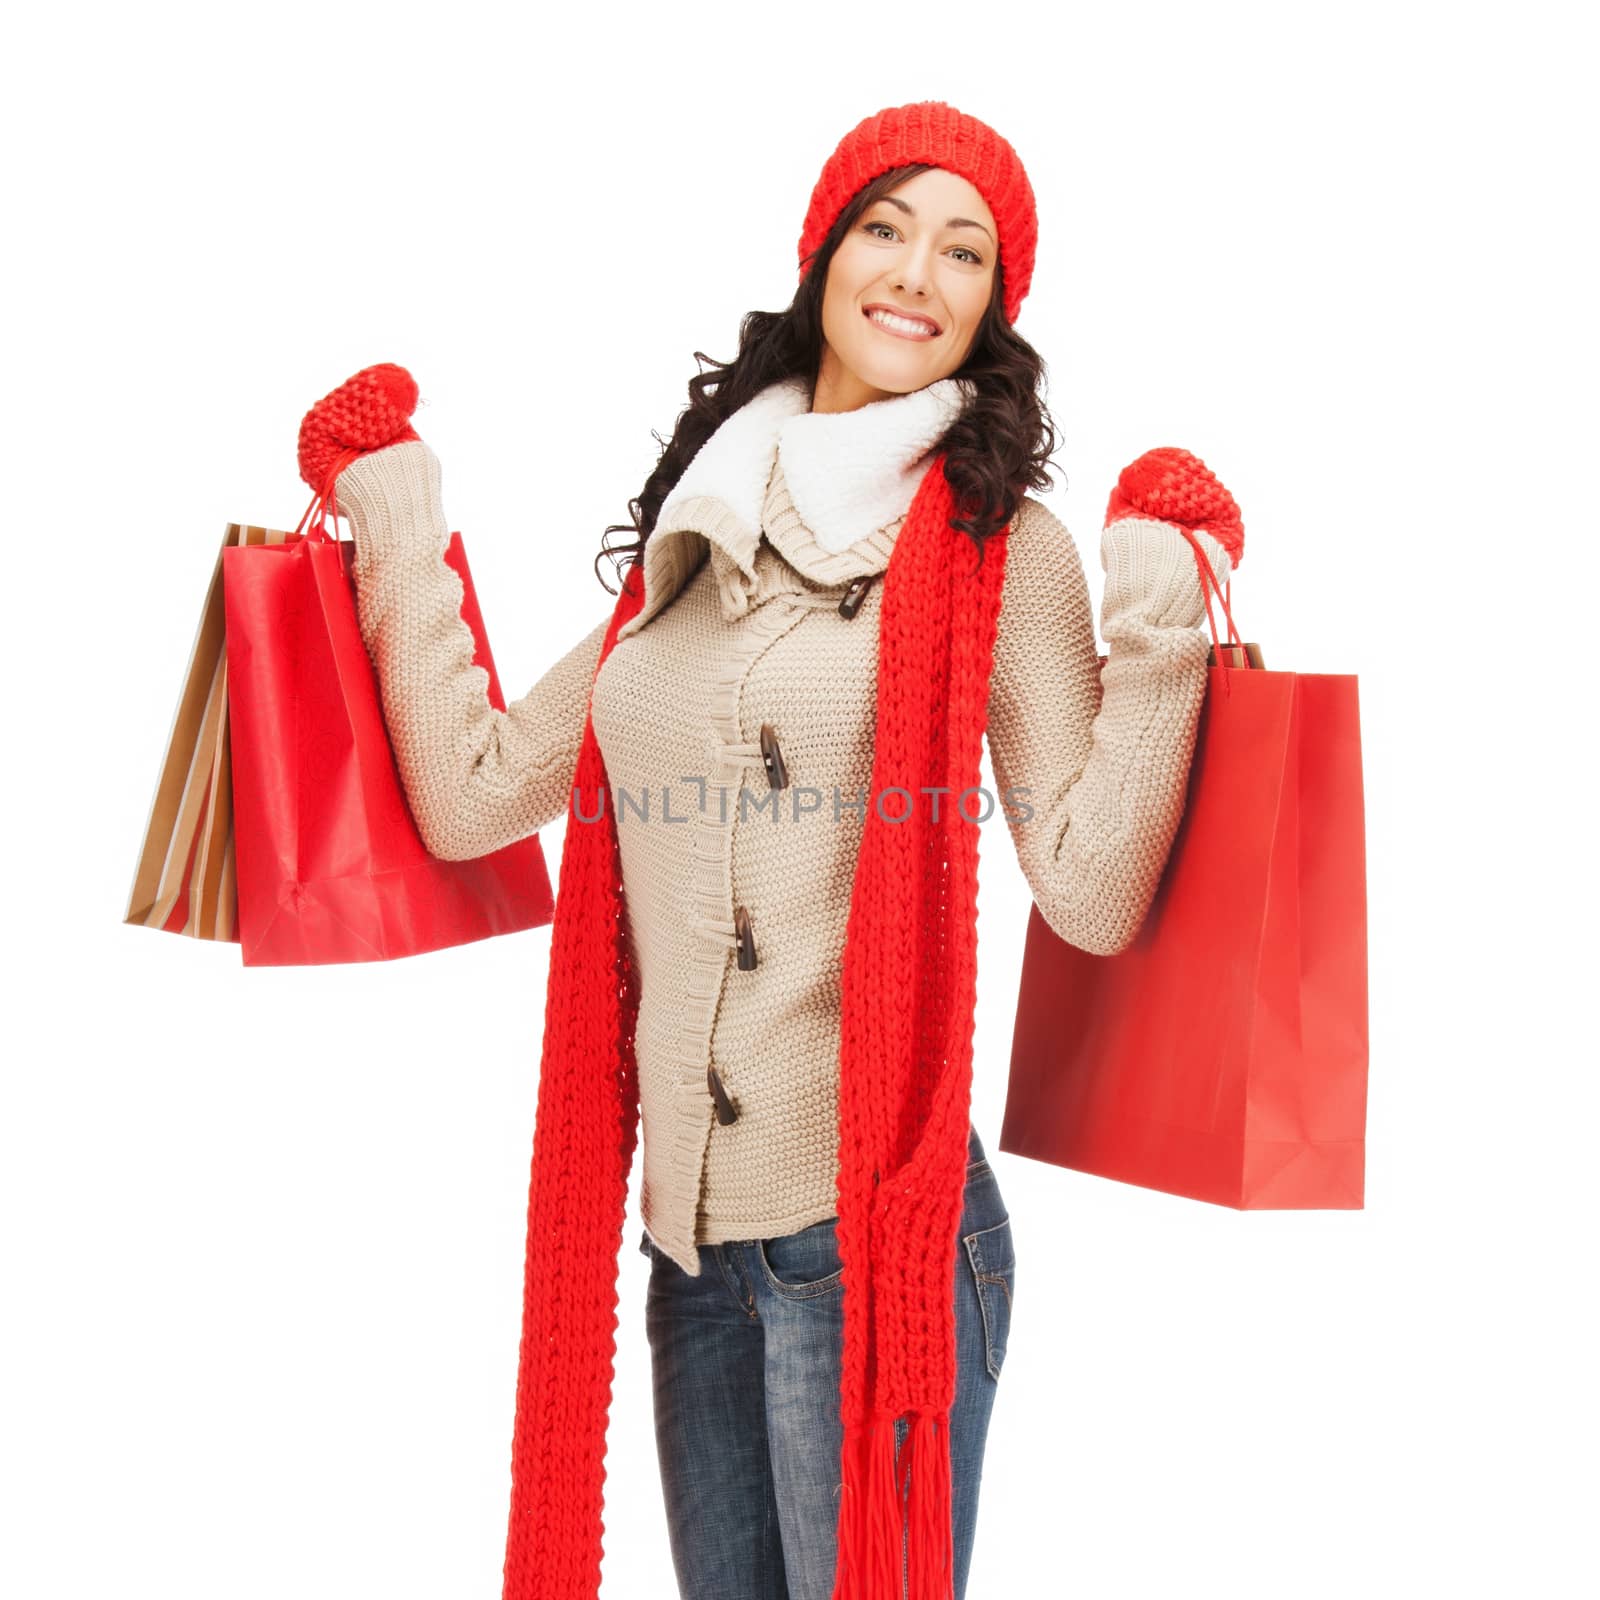 retail and sale concept - full-length picture of happy woman in winter clothes with shopping bags